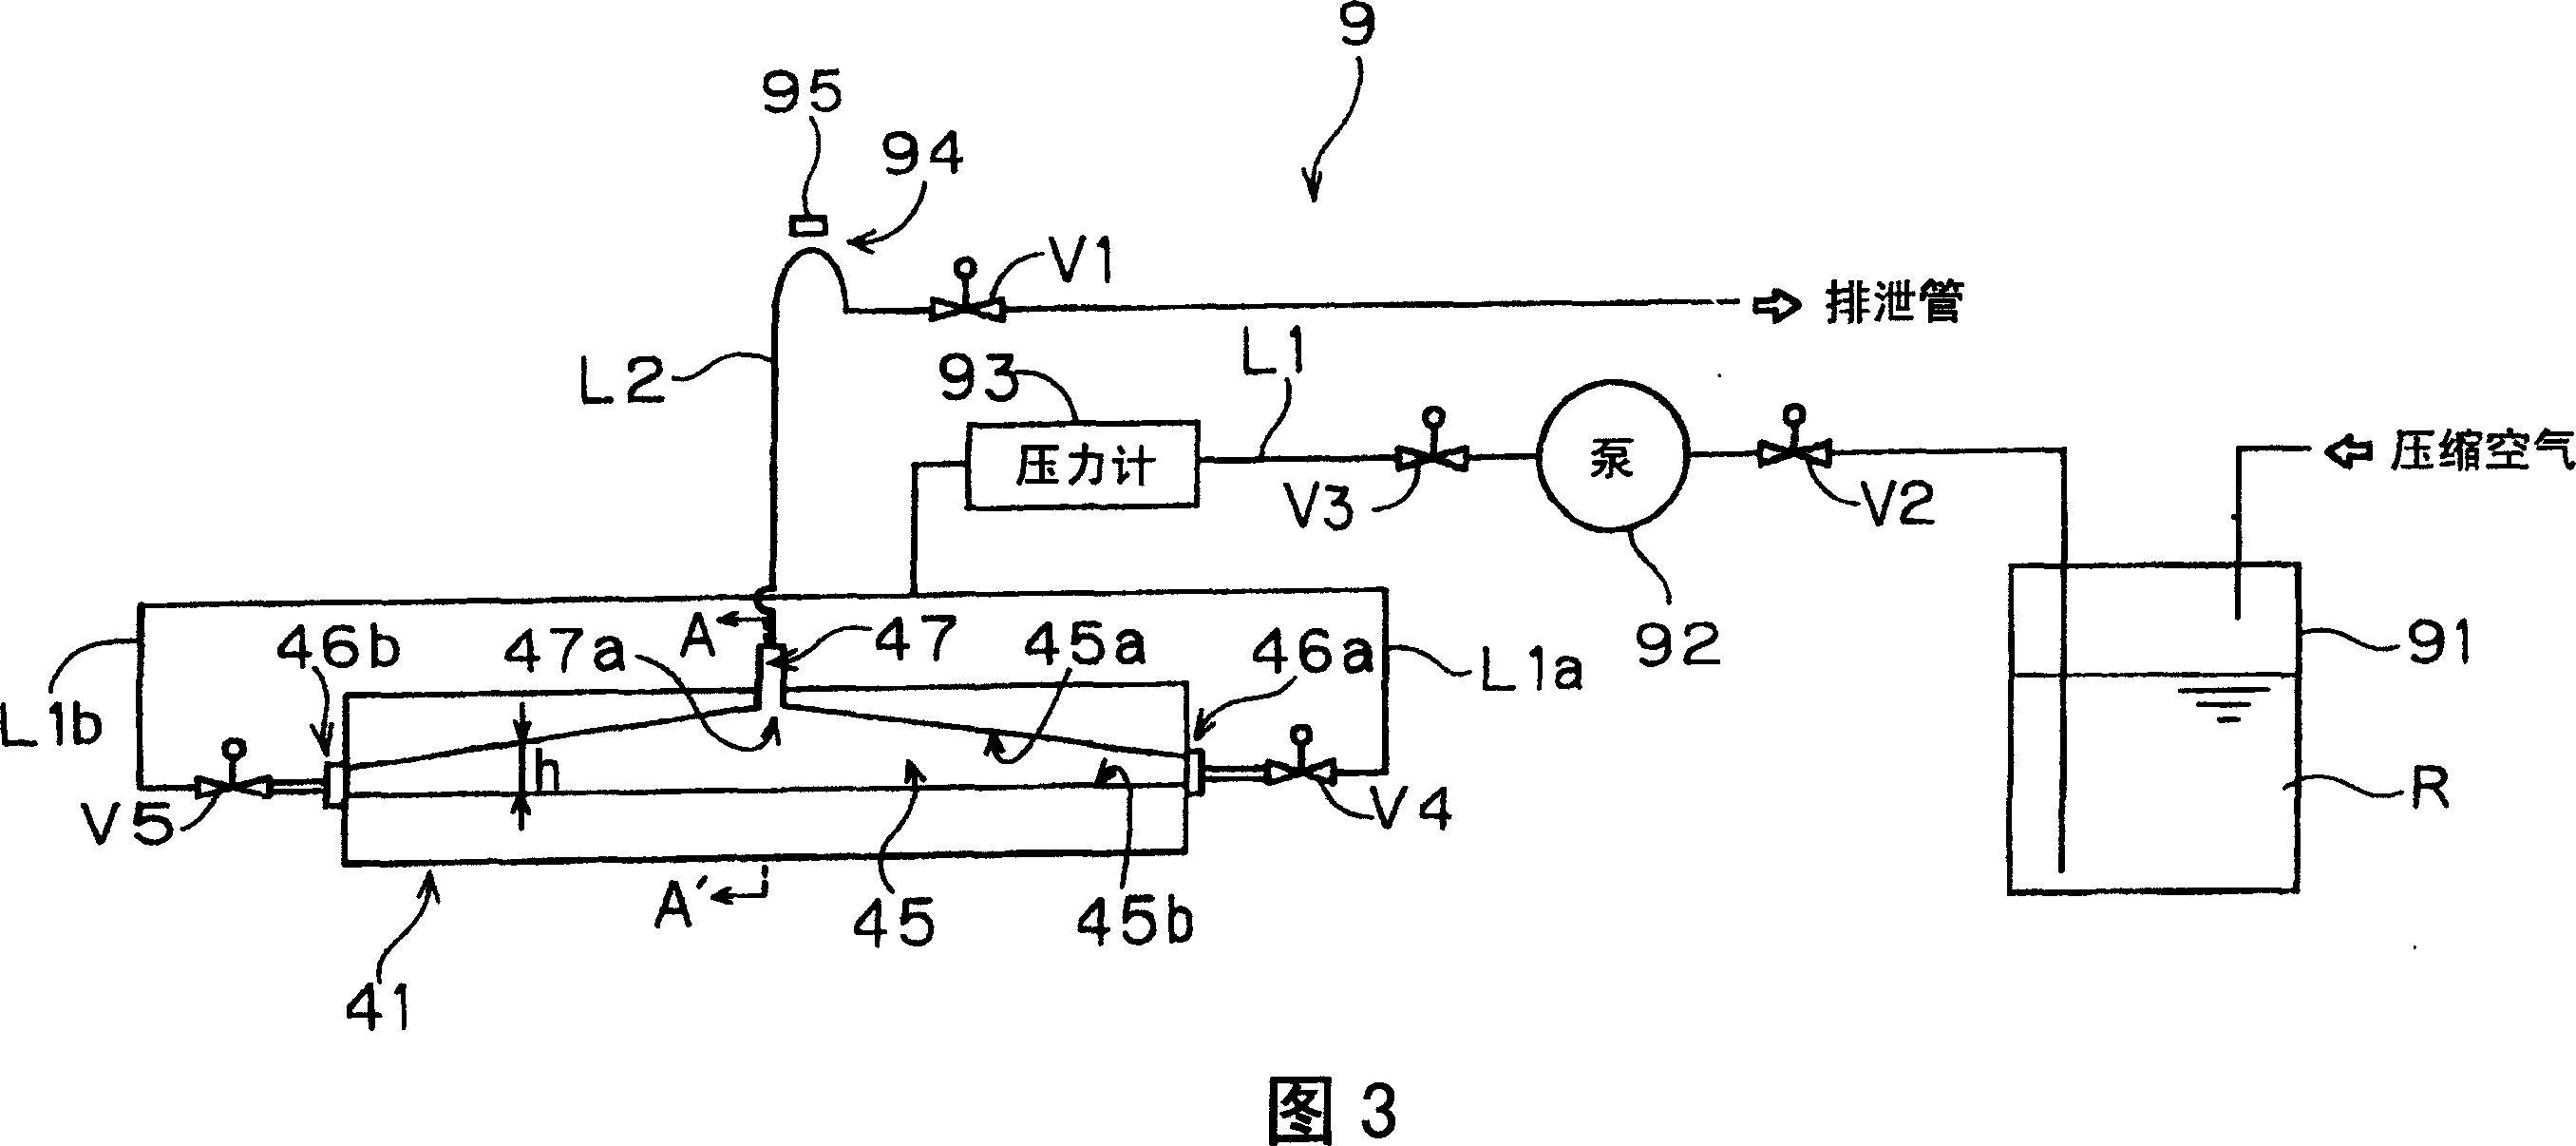 Base plate treater and slit jet nozzle